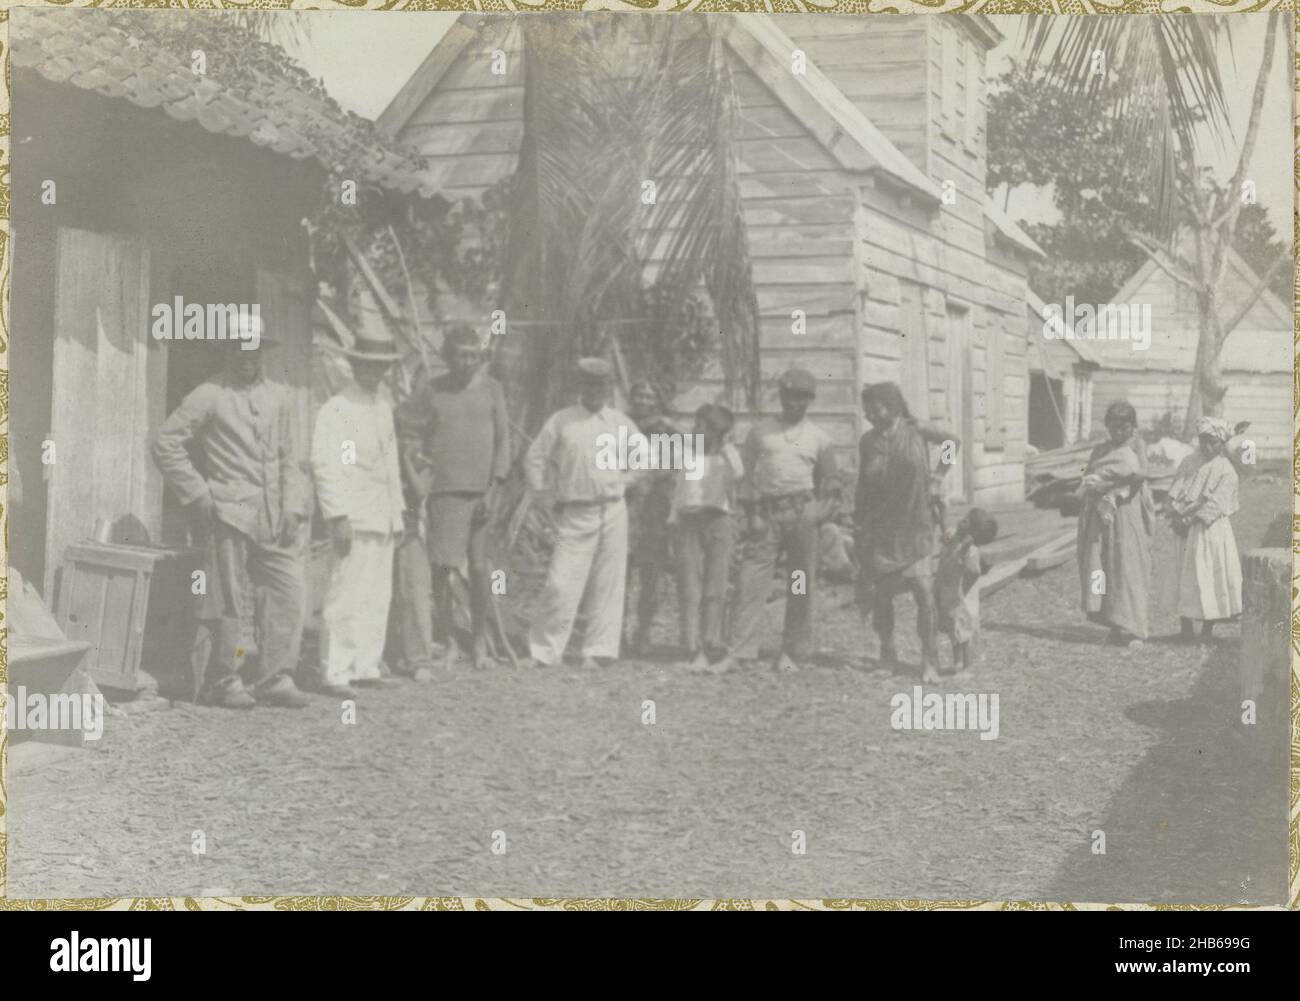 Villagers, A group of villagers standing in front of some houses. Part of the photo album Souvenir de Voyage (part 1), about the life of the Doijer family in and around the plantation Ma Retraite in Suriname in the years 1906-1913., Hendrik Doijer (attributed to), Suriname, 1906 - 1913, photographic support, gelatin silver print, height 115 mm × width 166 mm Stock Photo